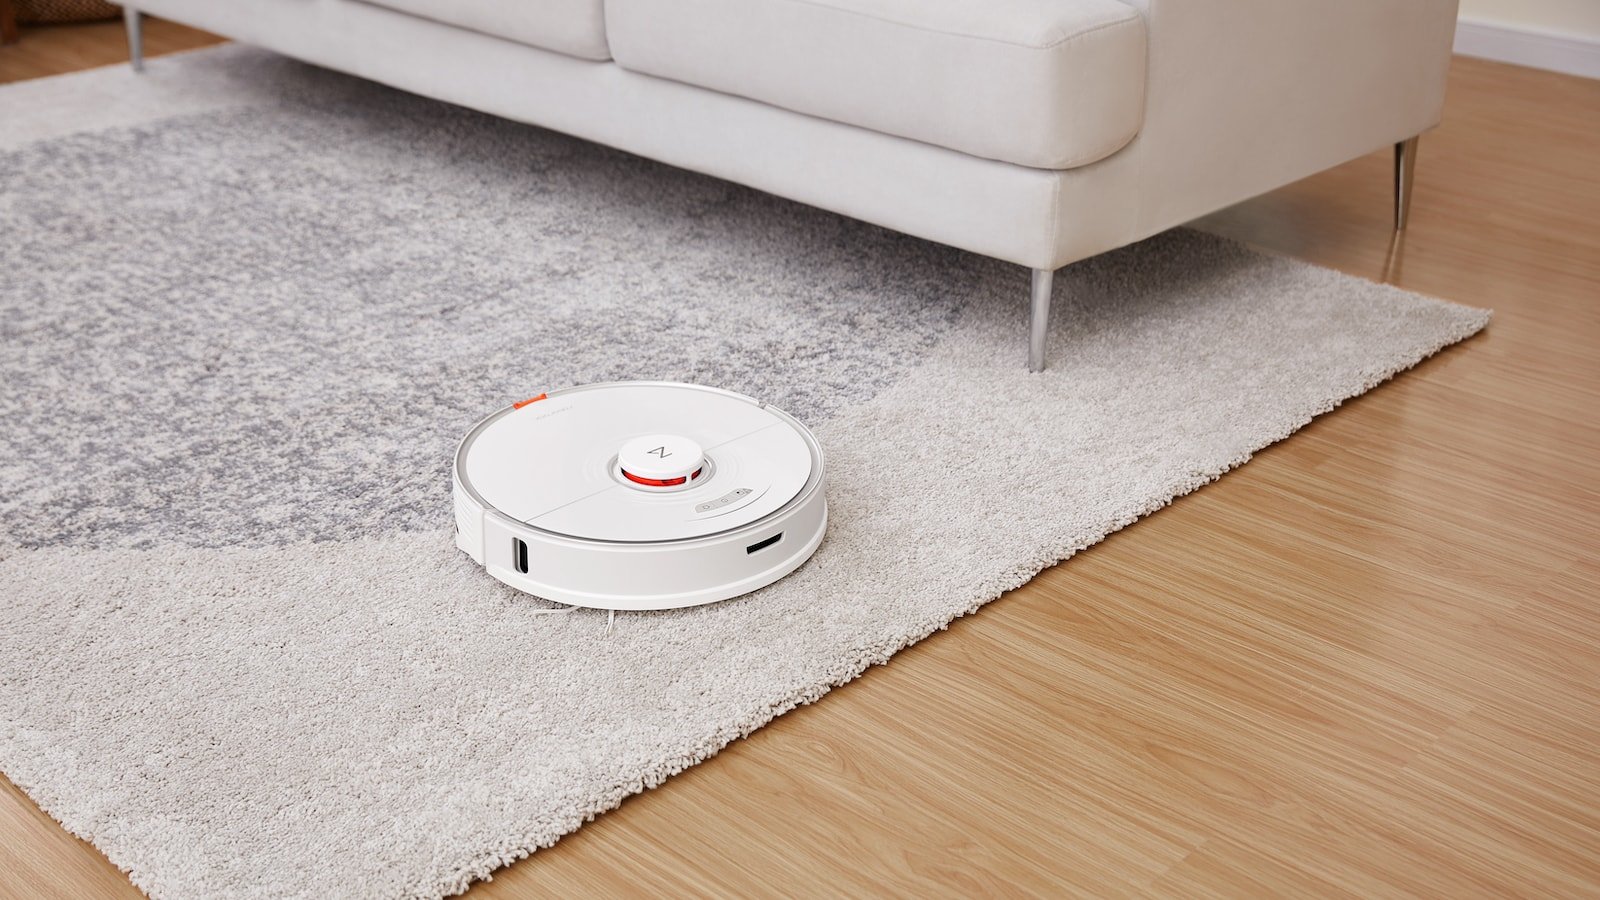 Roborock S7 robot vacuum can actually scrub up tough, dried-on stains with sonic mopping